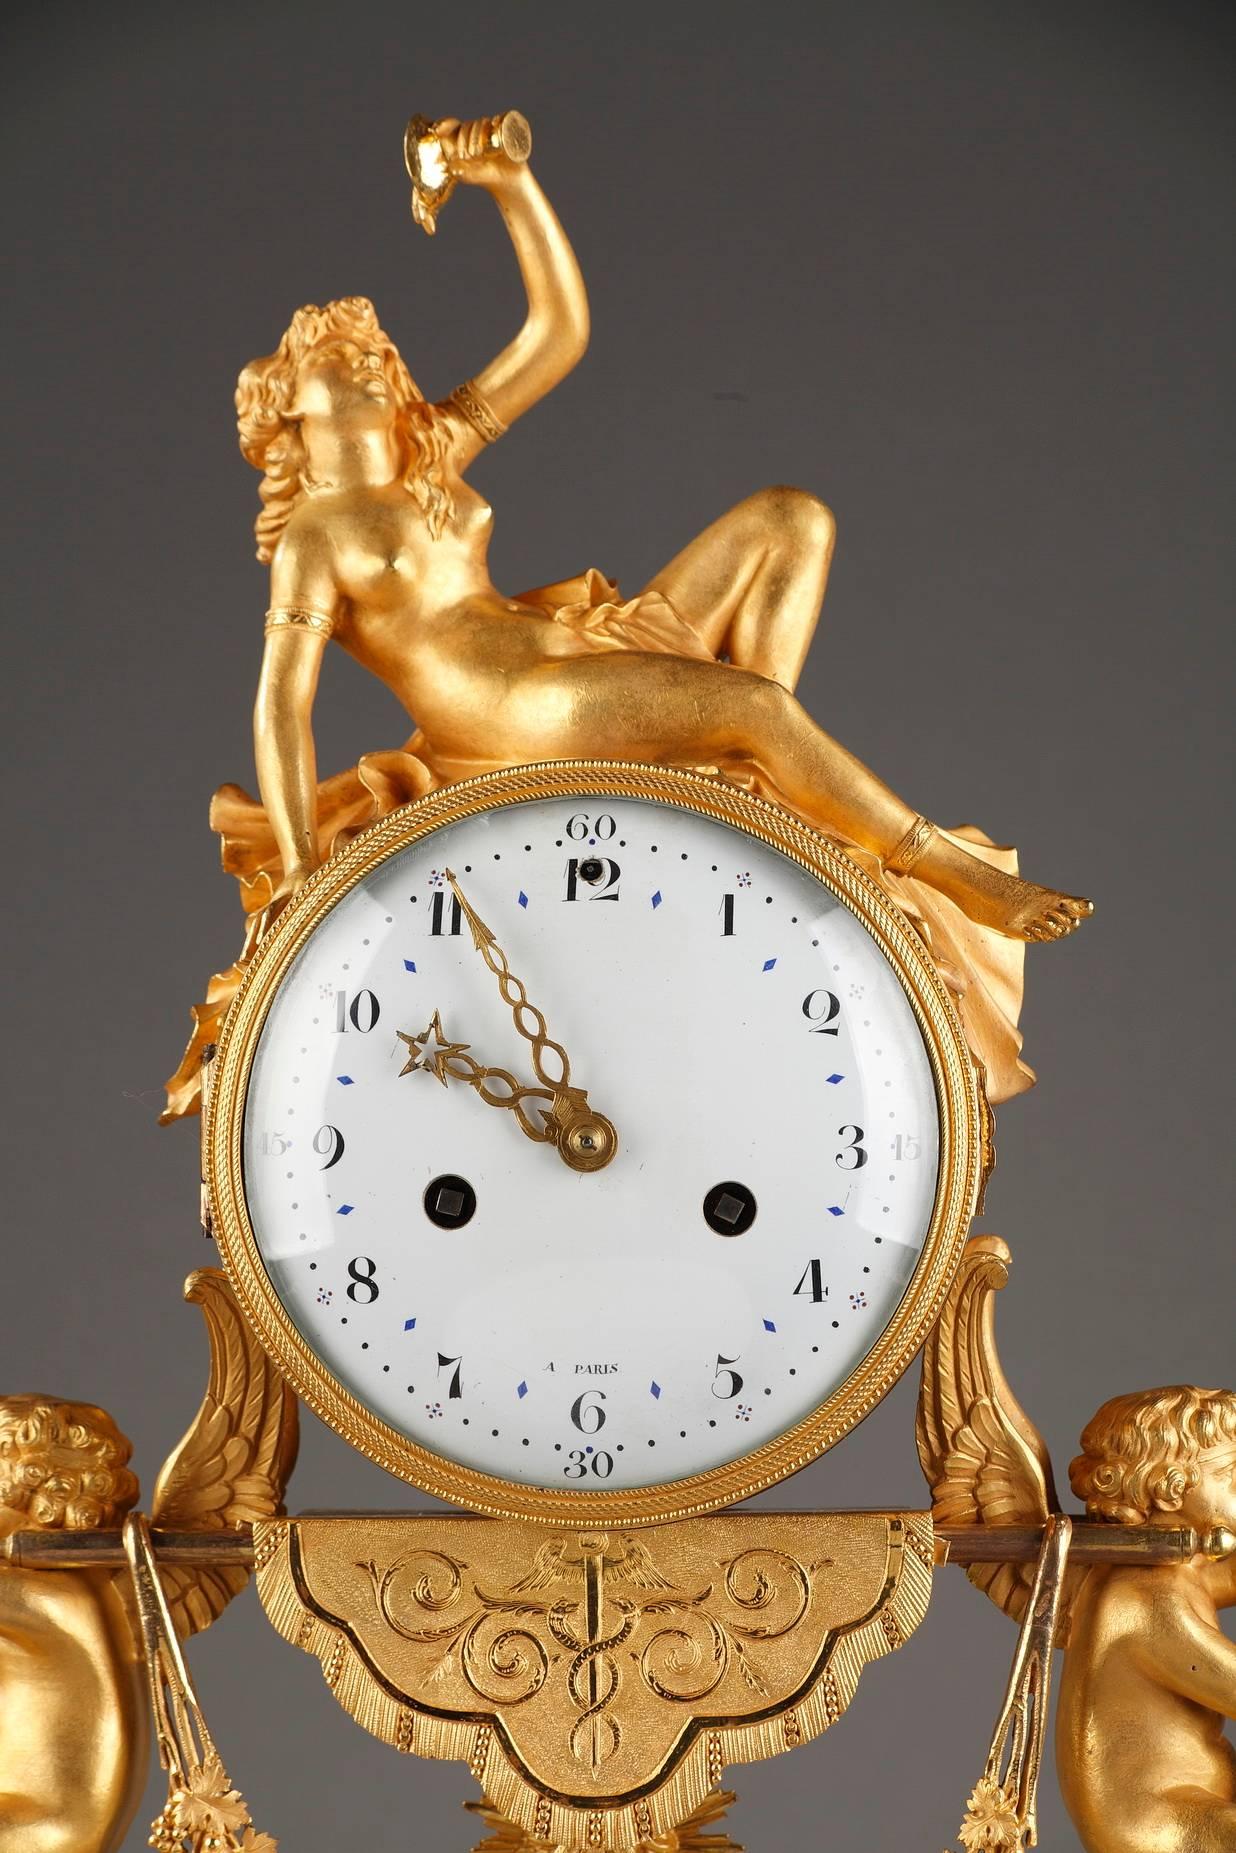 Set composed of a mantel clock and a pair of candelabras in marble, gilded and sculpted bronze, decorated with ibexes and cupids. The clock features a nude bacchante, holding a cup of wine and resting on the top of the dial, which rests upon a